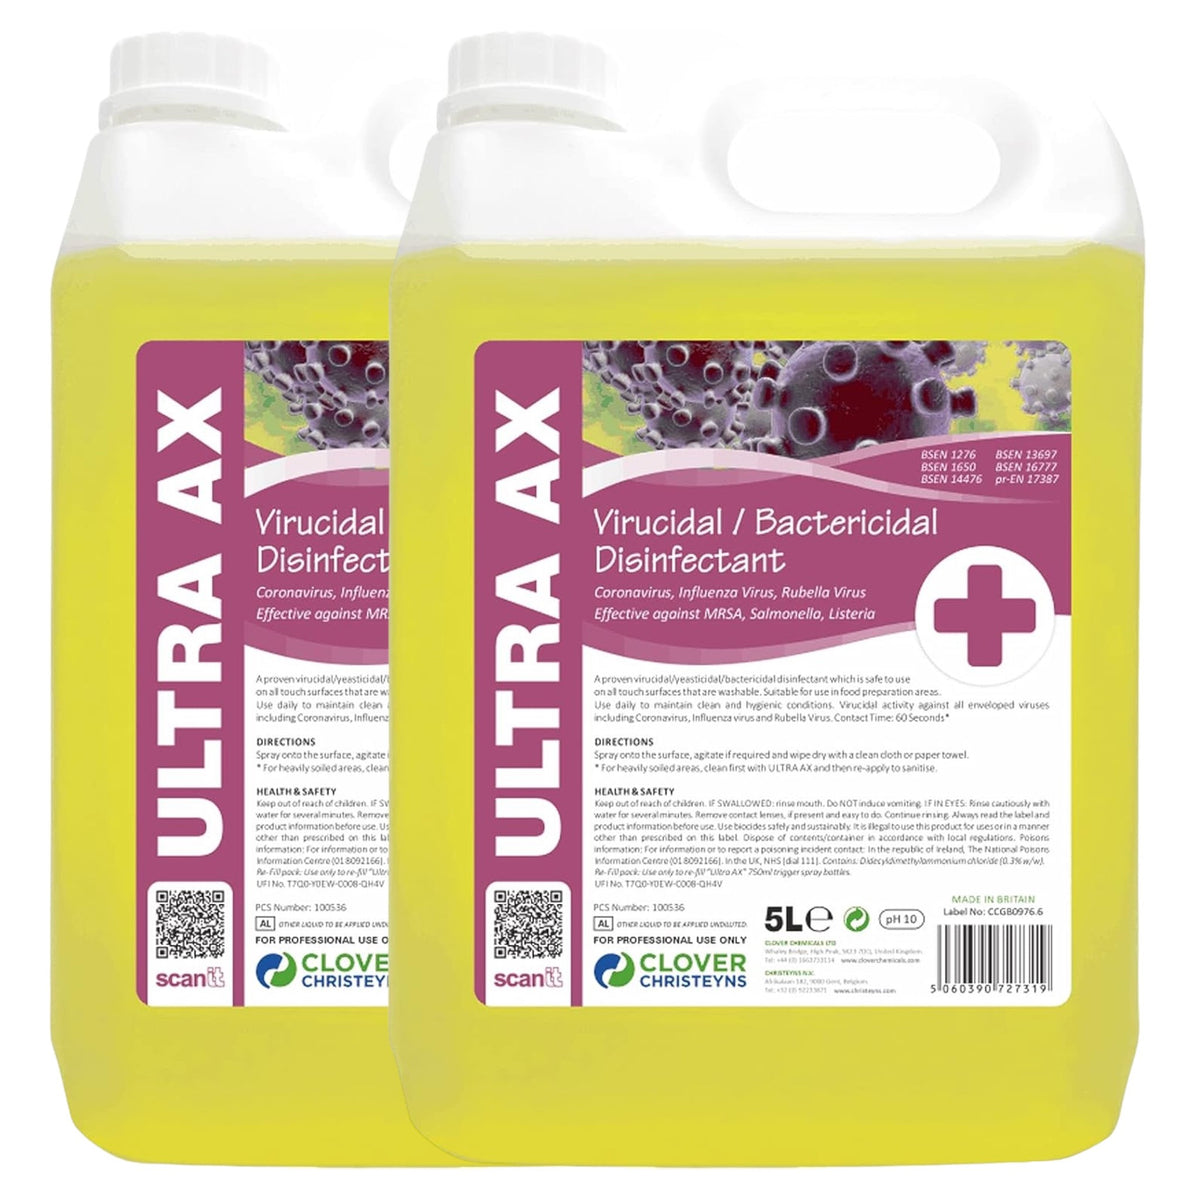 Clover Chemicals Ultra AX - 10L Viricidal Cleaner 5 Litre